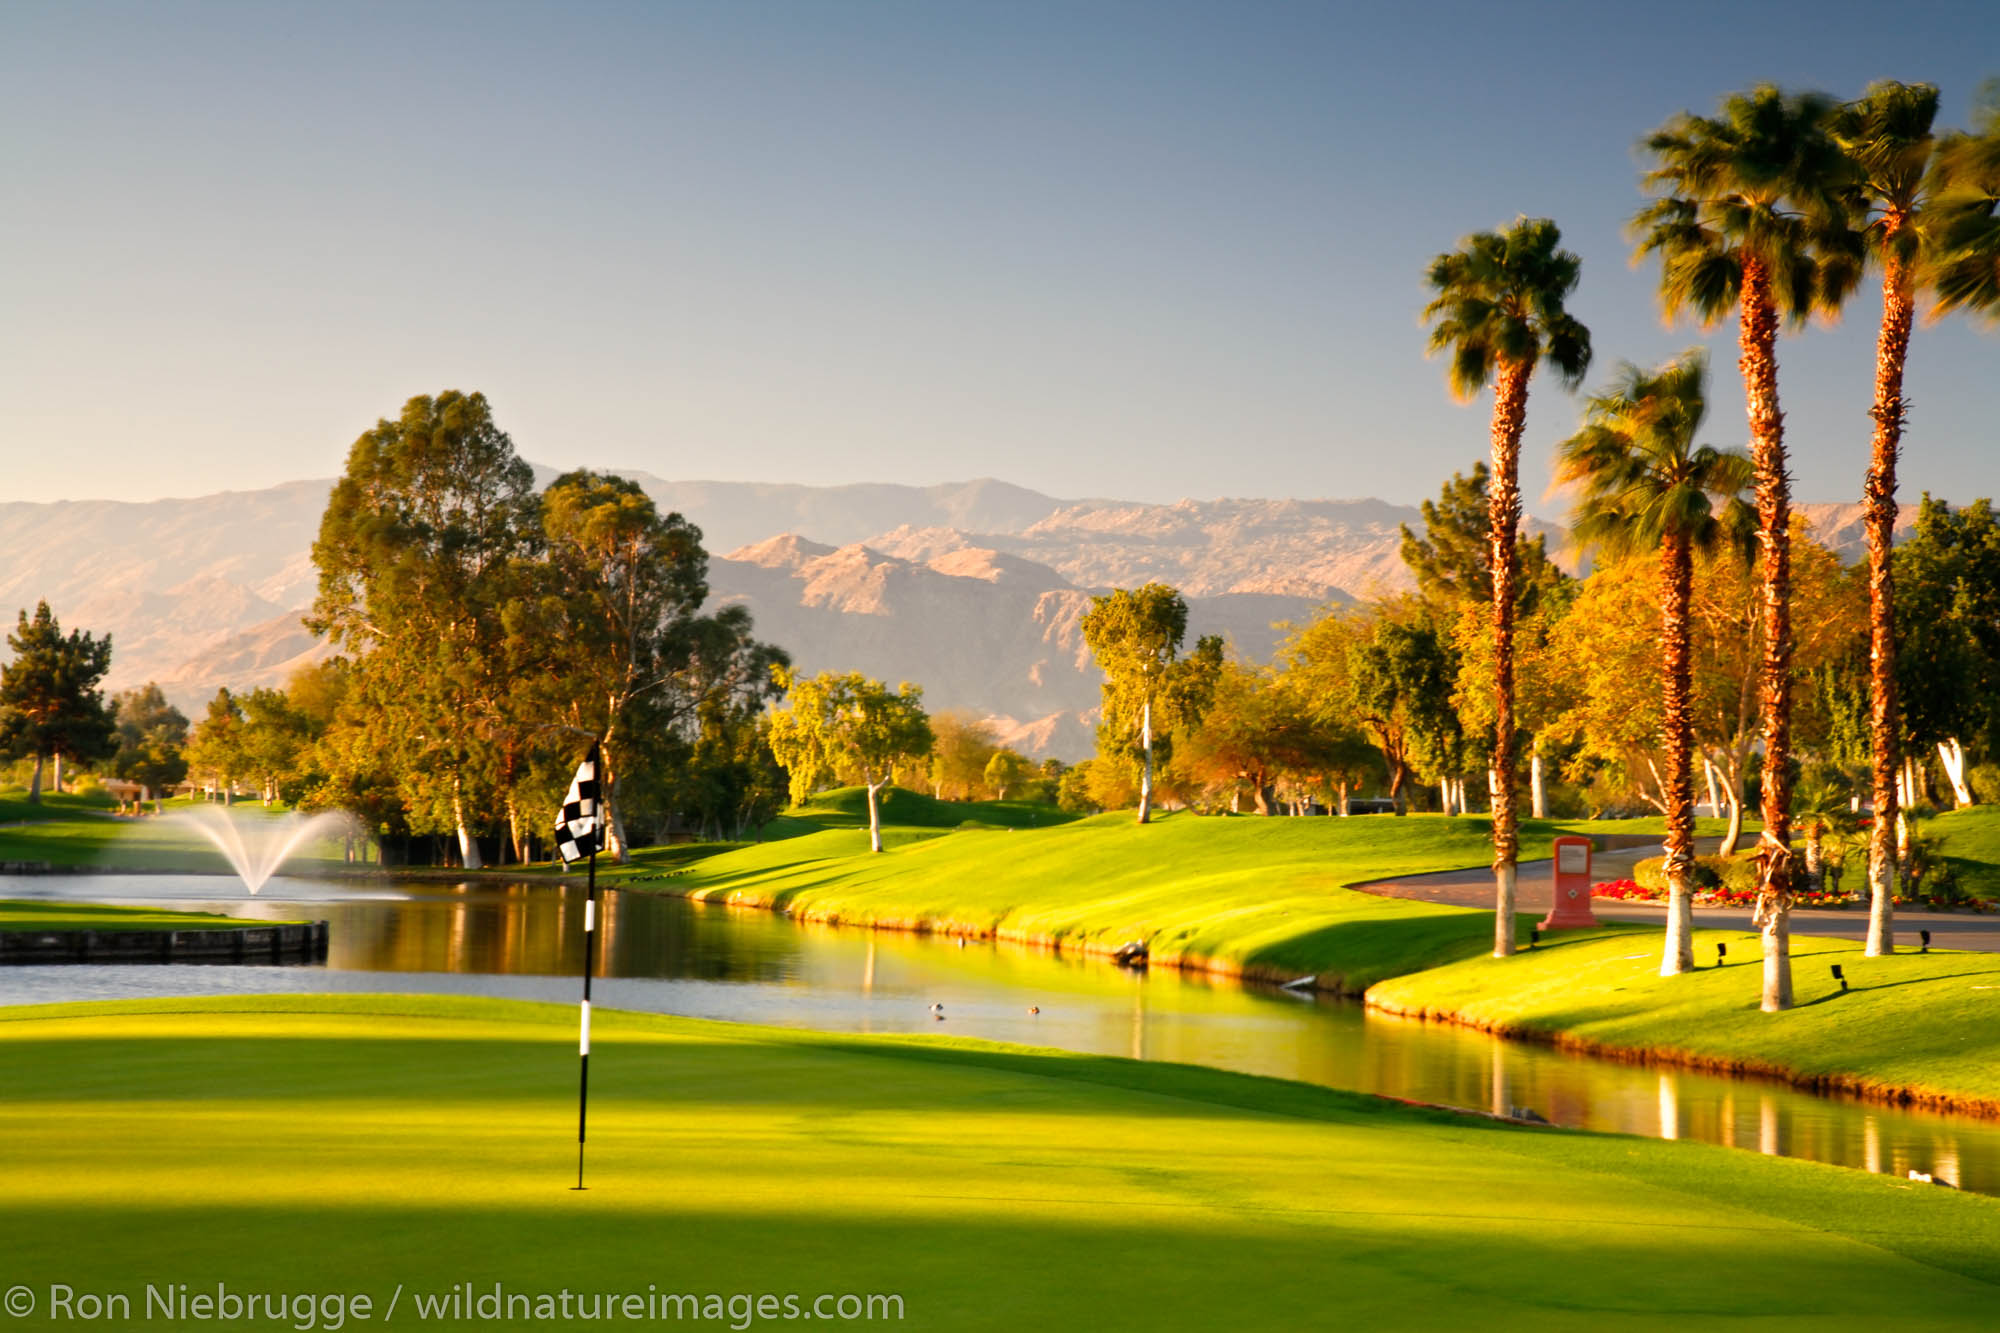 The 18th hole on the golf course at the Westin Mission Hills Resort and Spa in Rancho Mirage near Palm Springs, California.